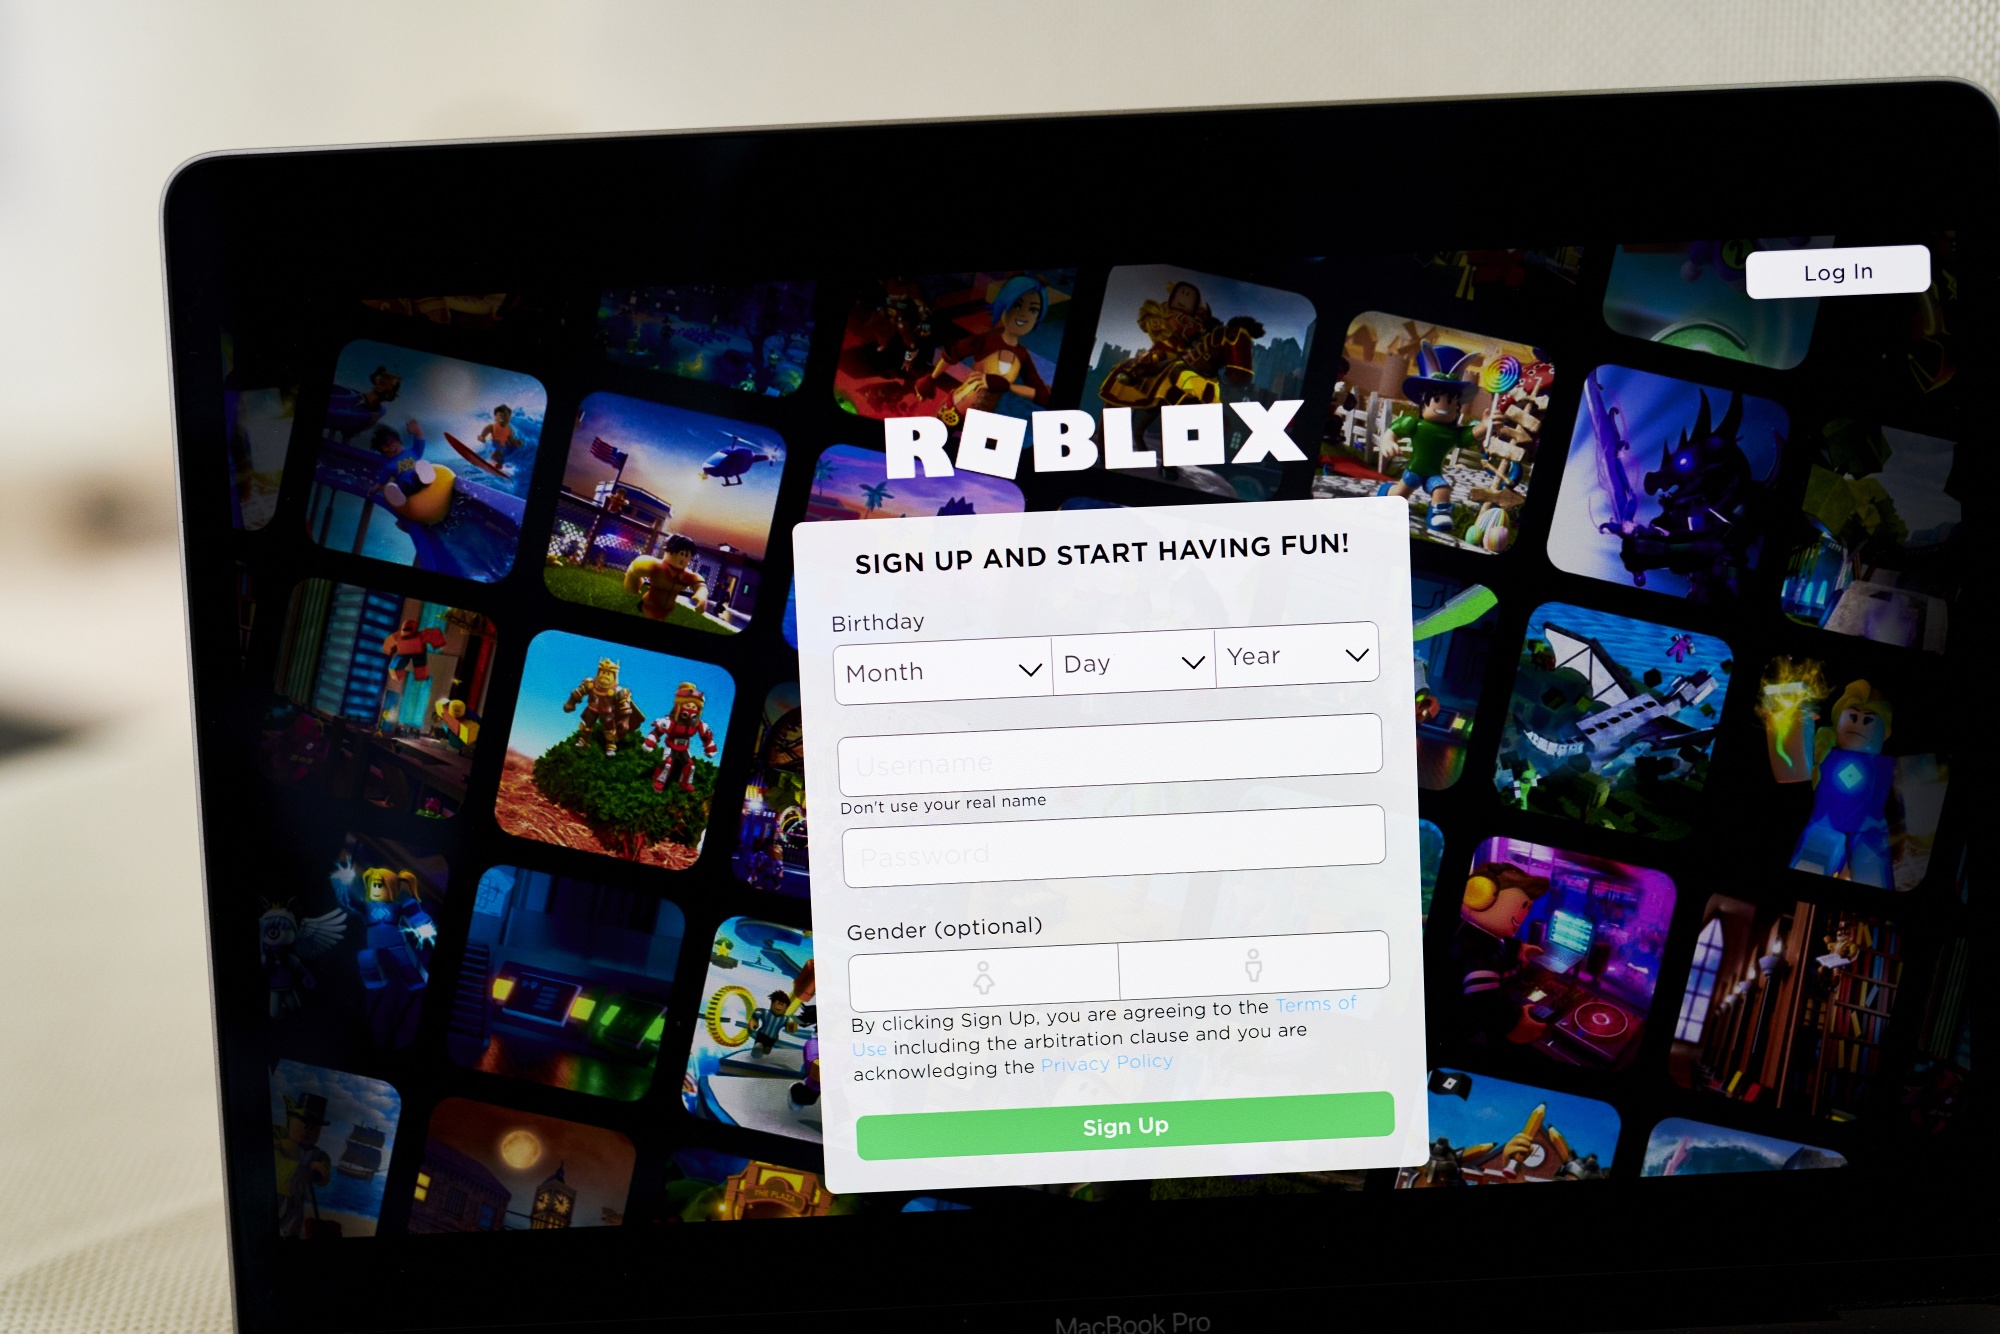 Roblox Picked a Great Time to Go Public - Bloomberg